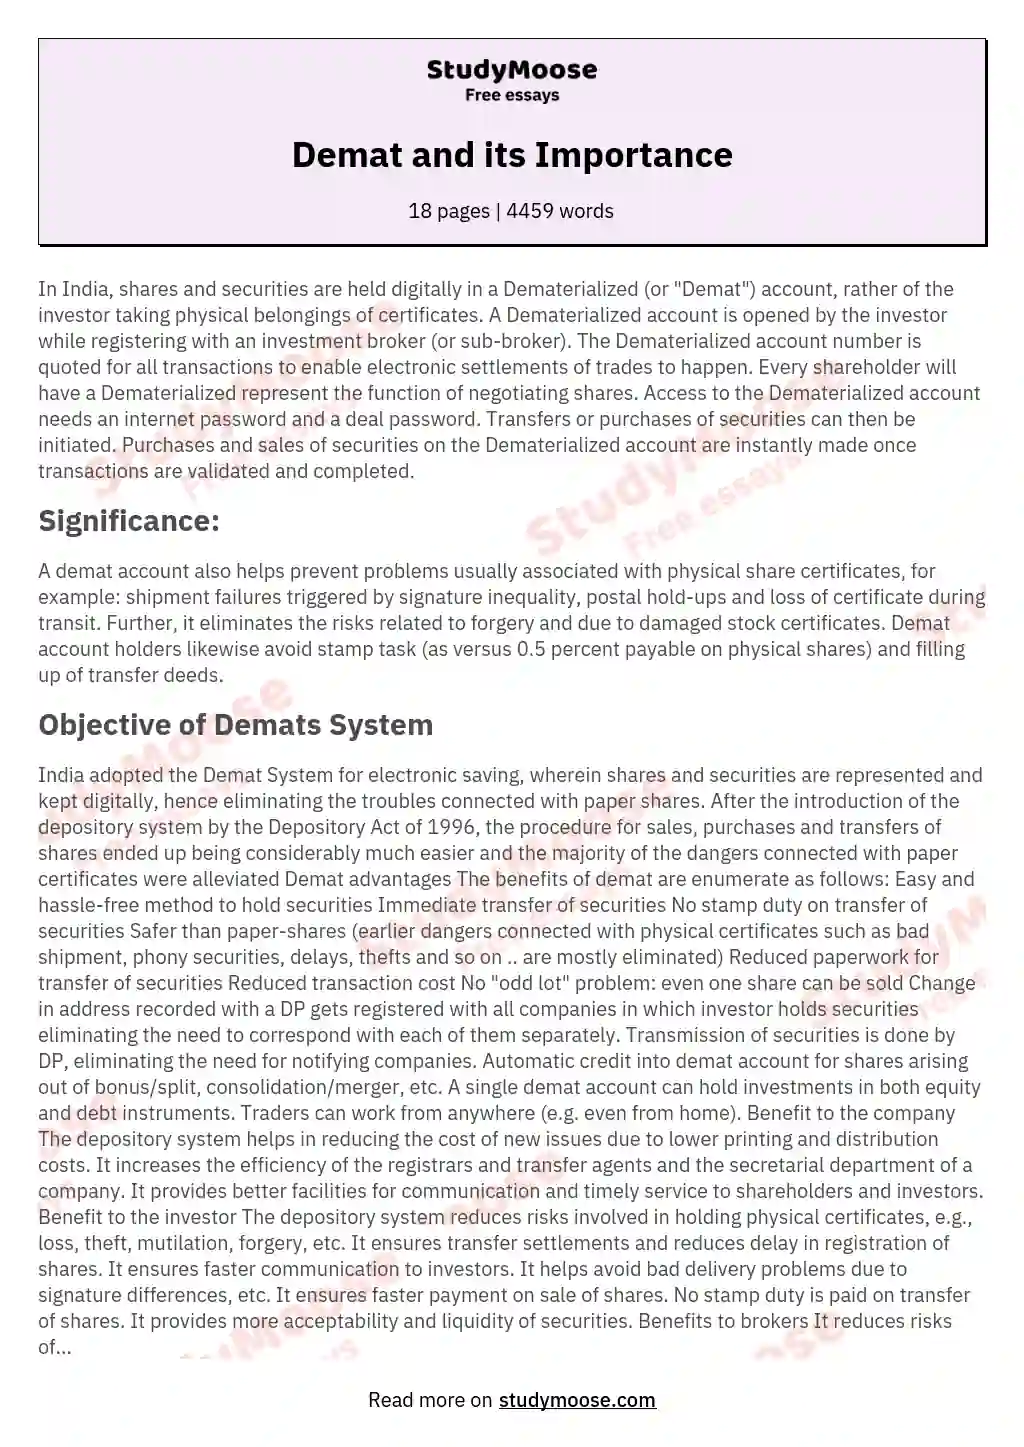 Demat and its Importance essay